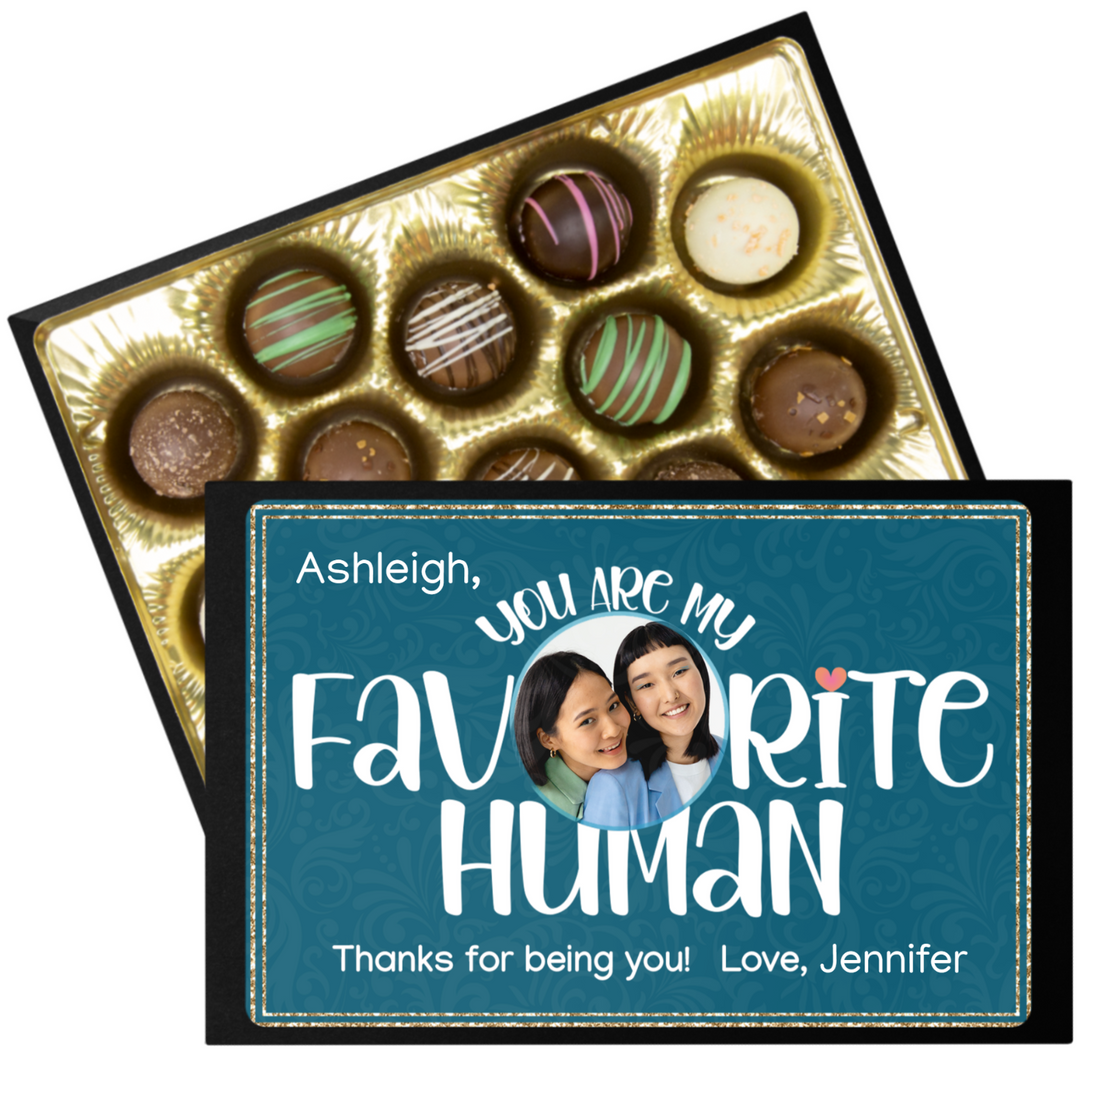 Personalized Favorite Human Chocolate Box - Handmade Chocolate Truffles - Thank You Gift for Friends - Customized Chocolate Gift